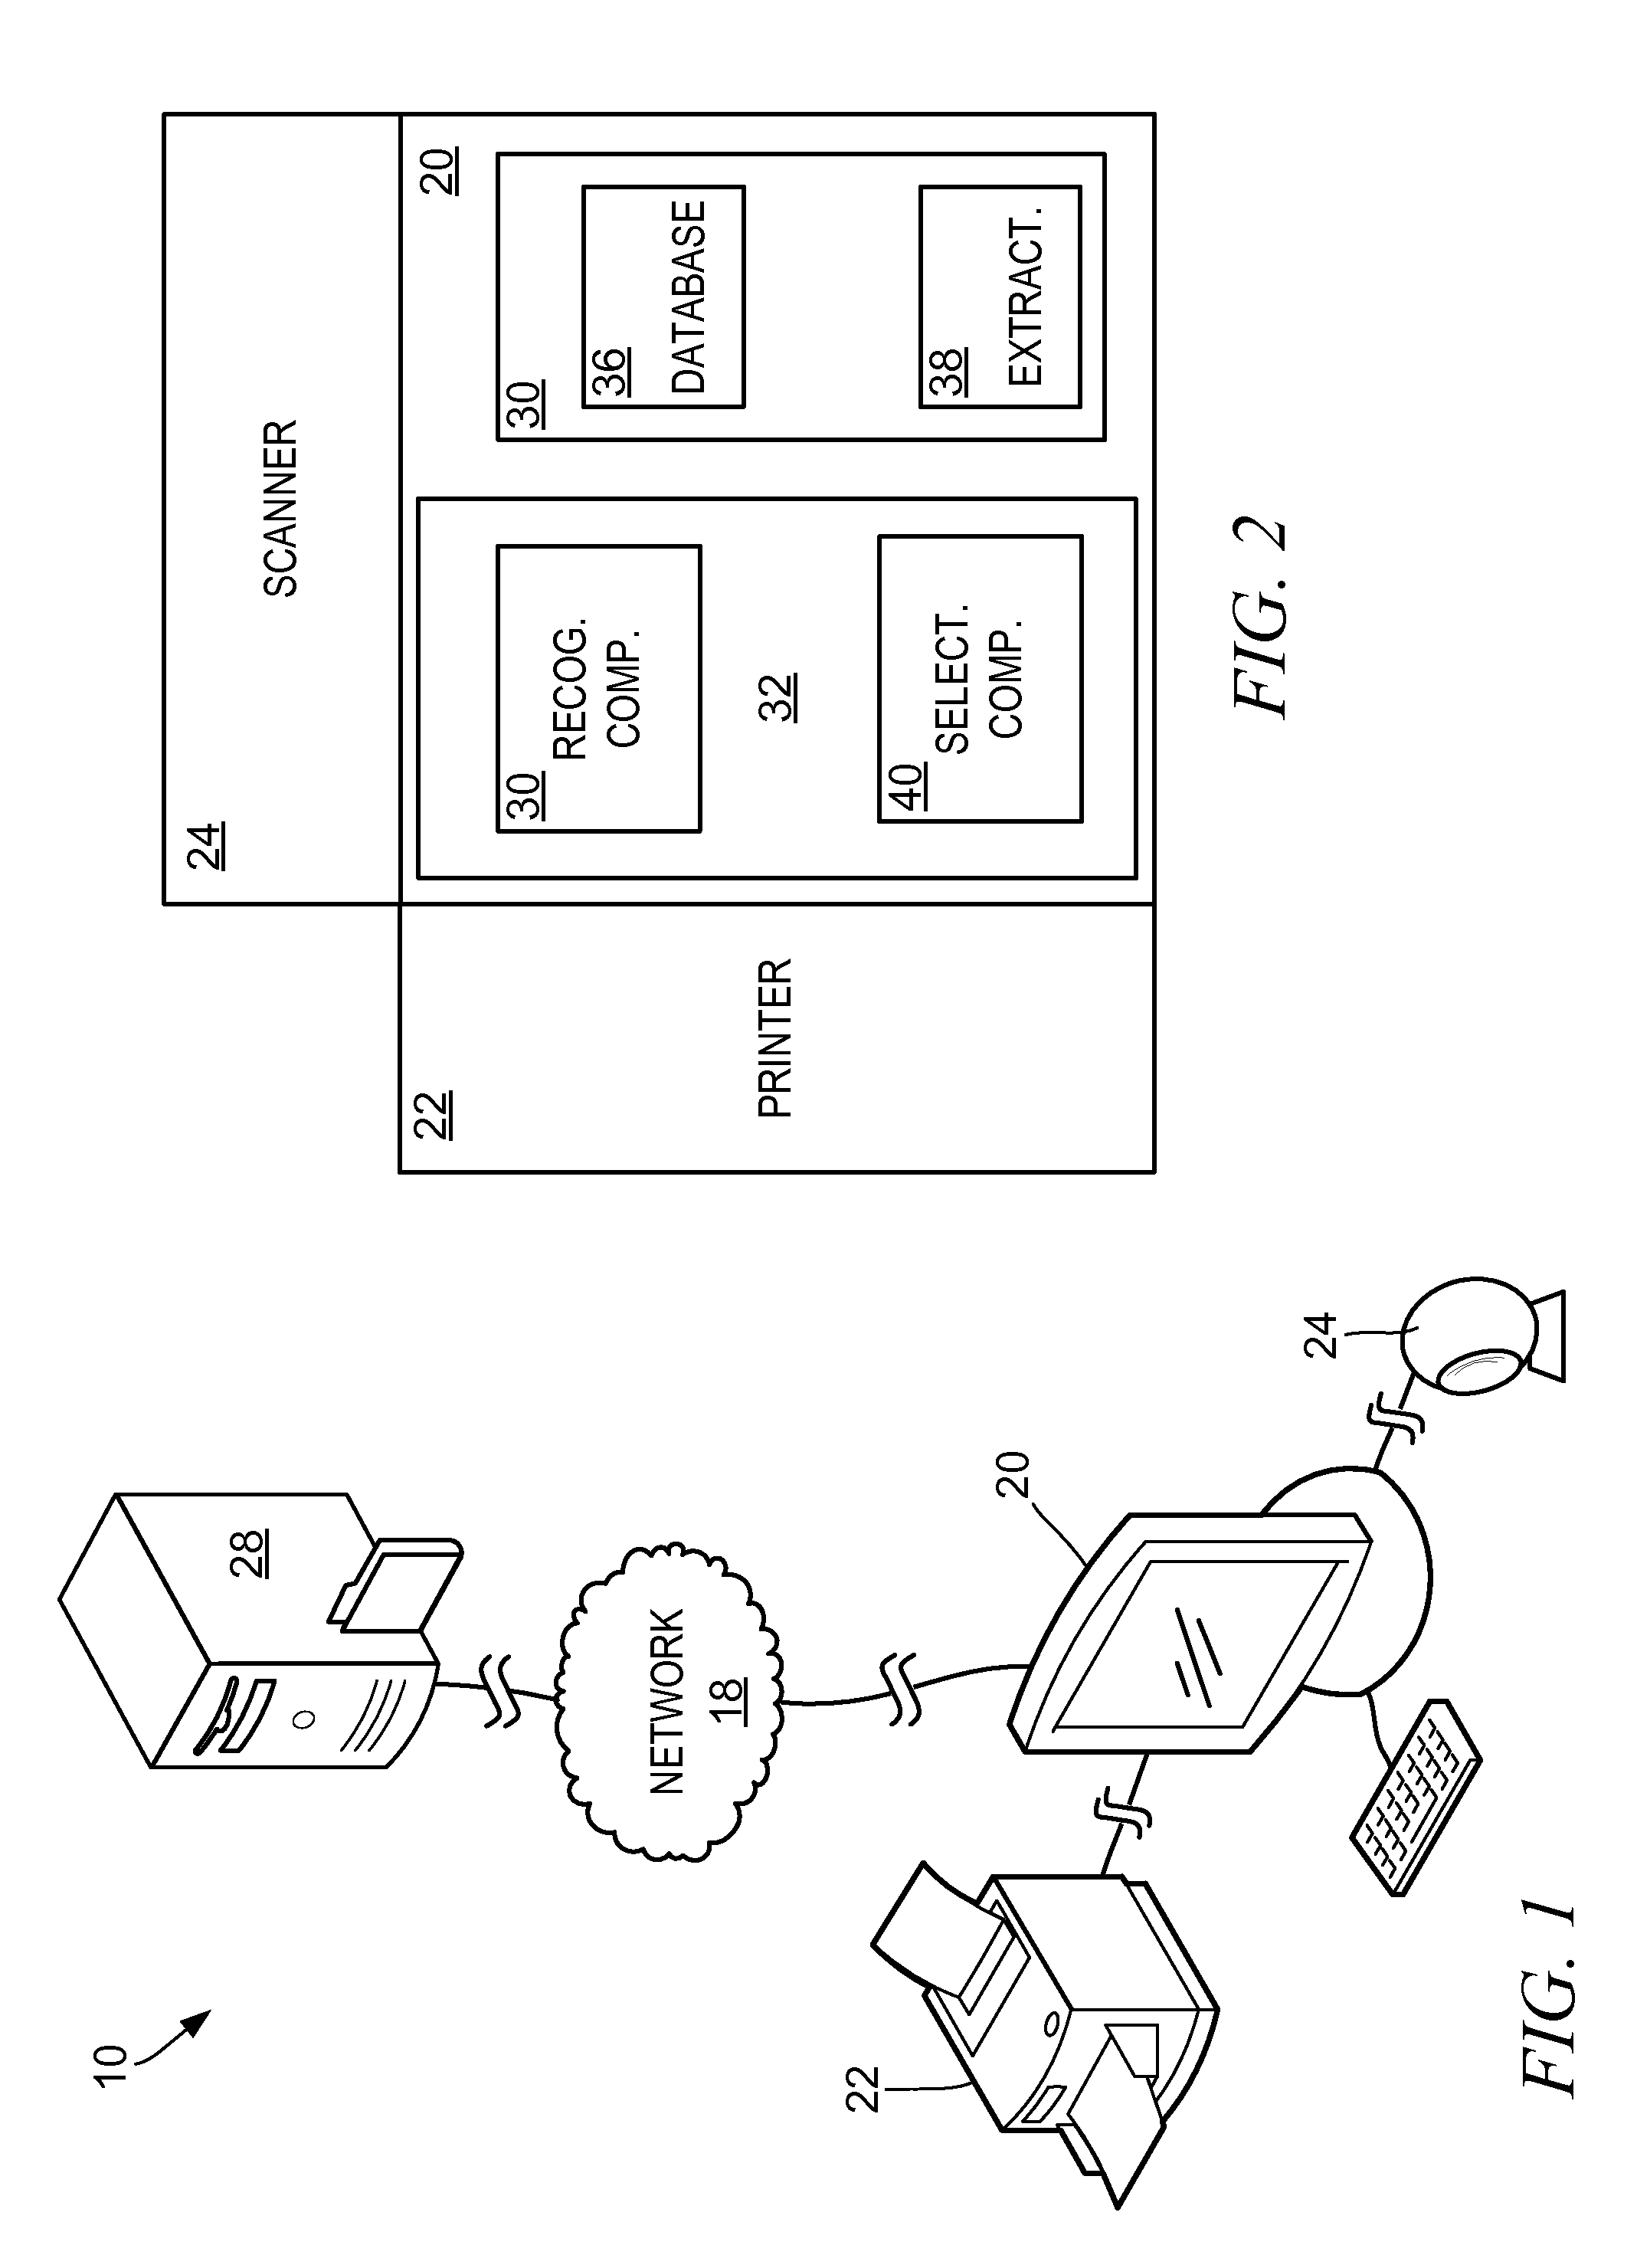 Adaptable information extraction and labeling method and system